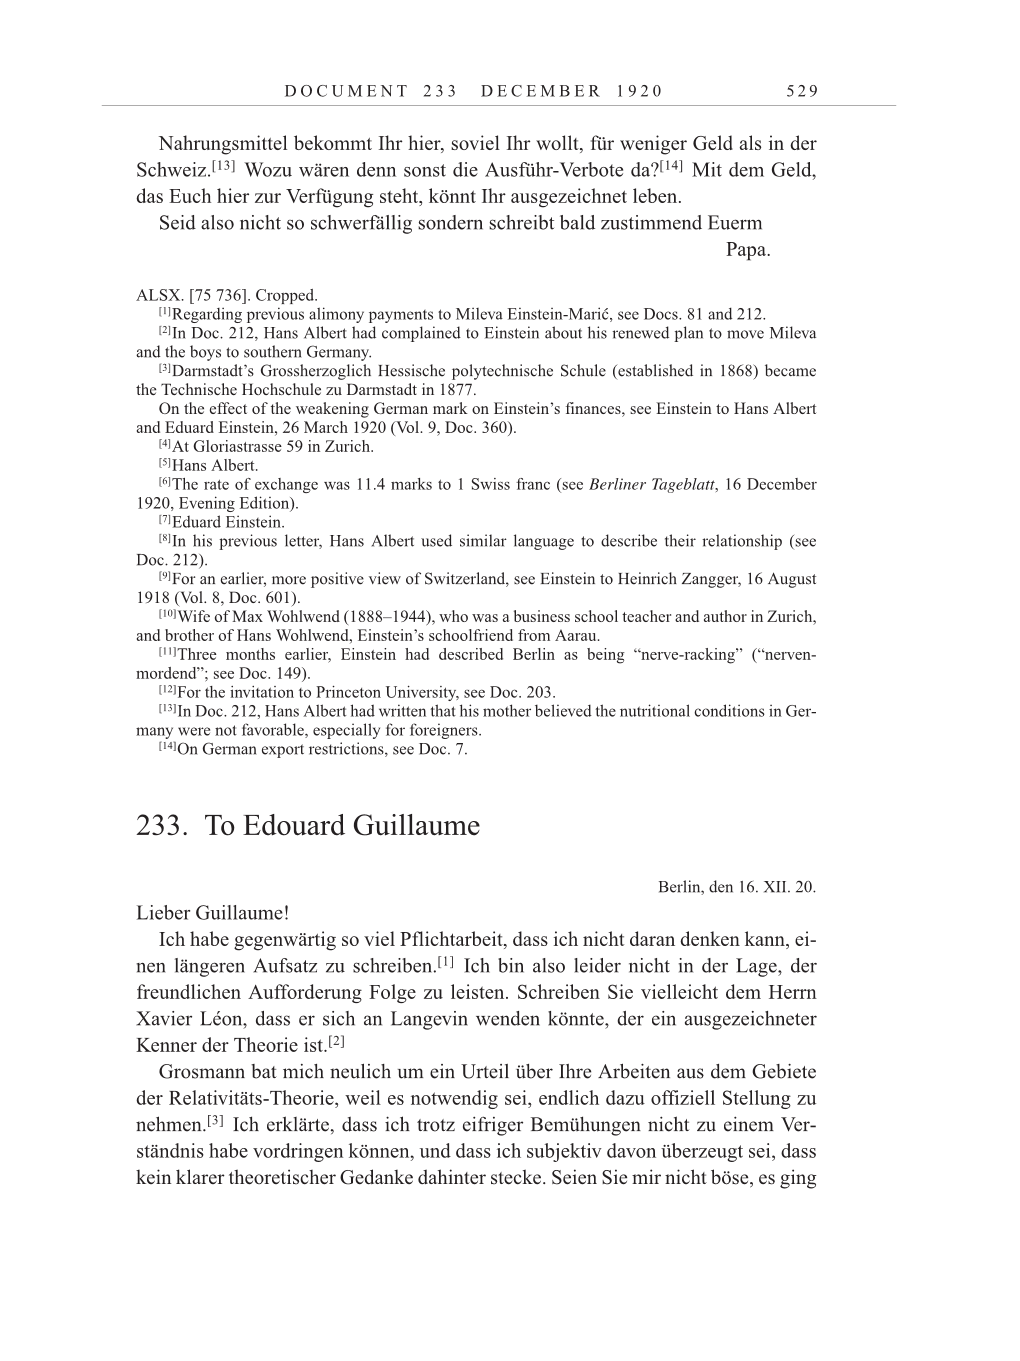 Volume 10: The Berlin Years: Correspondence May-December 1920 / Supplementary Correspondence 1909-1920 page 529